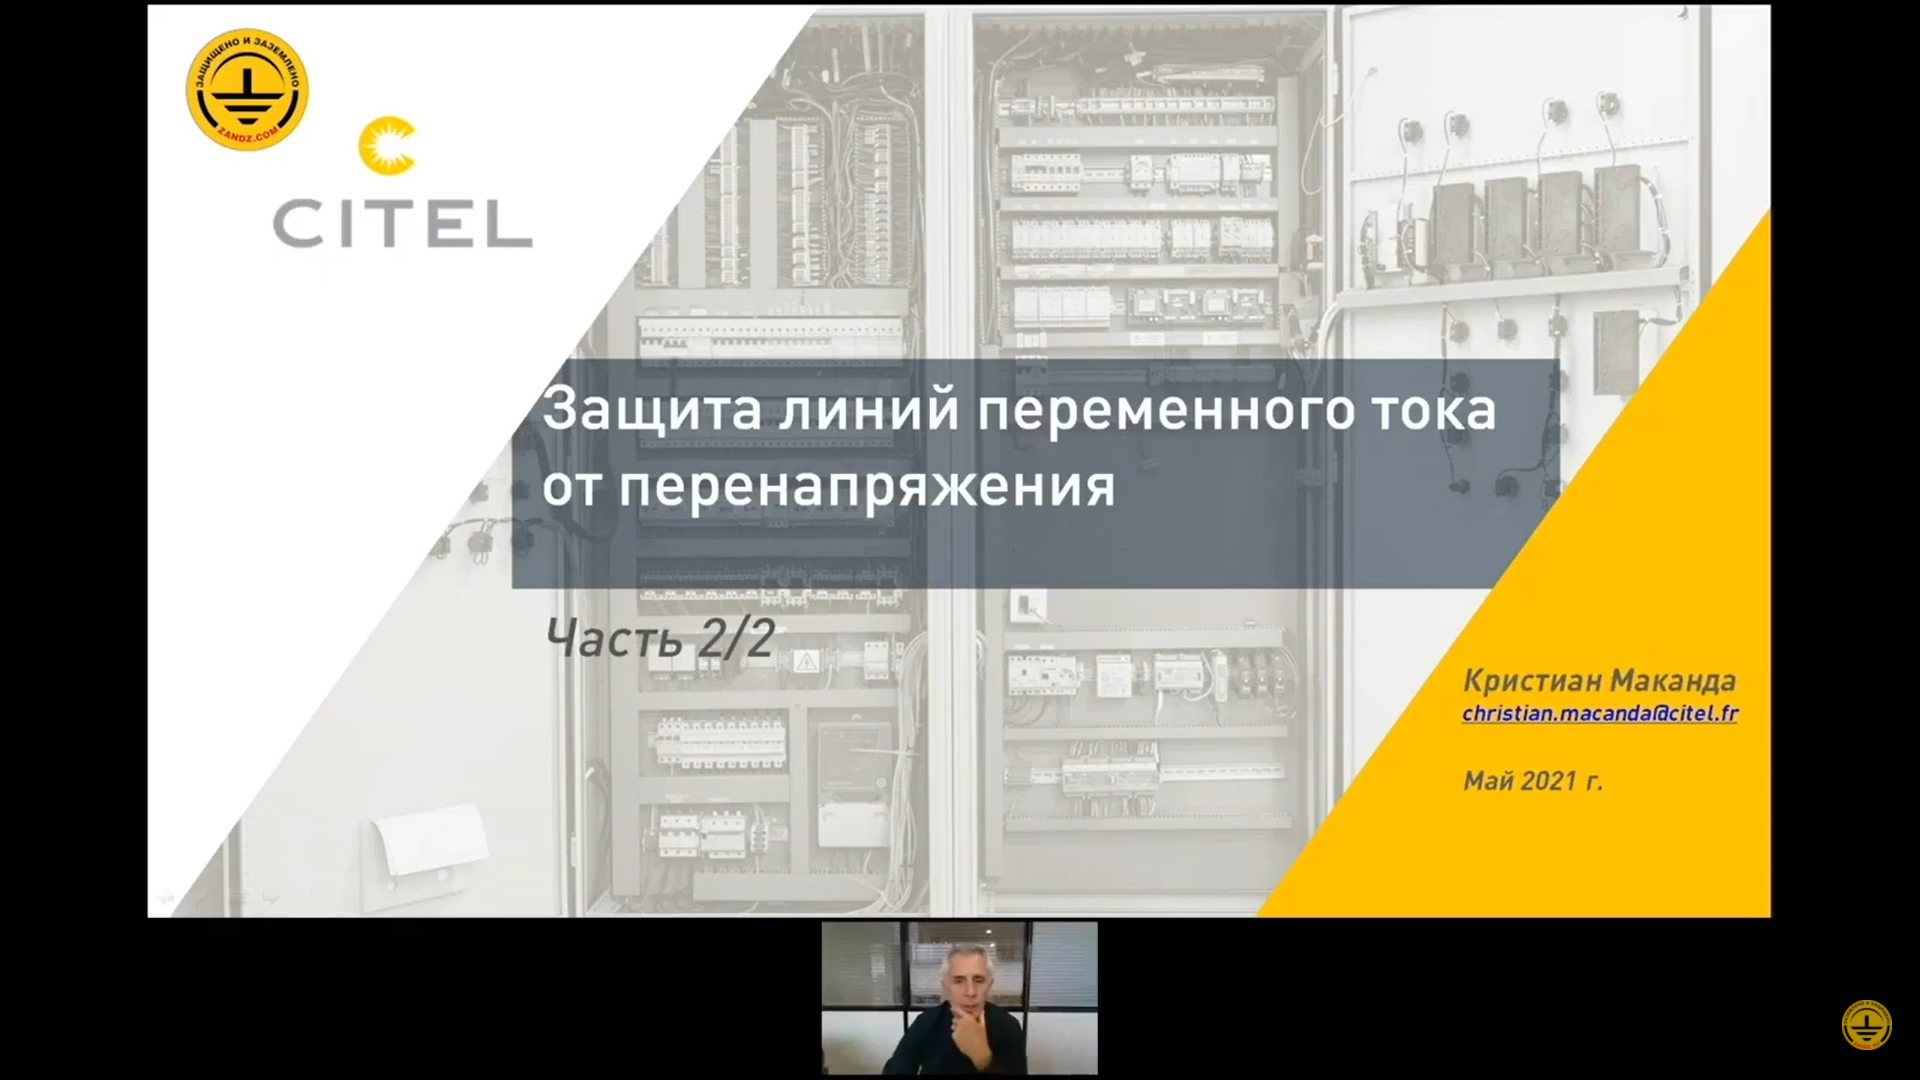 Record of the Webinar Selection and Installation of Surge Protectors for AC Powerlines According to European Surge Protection Standards